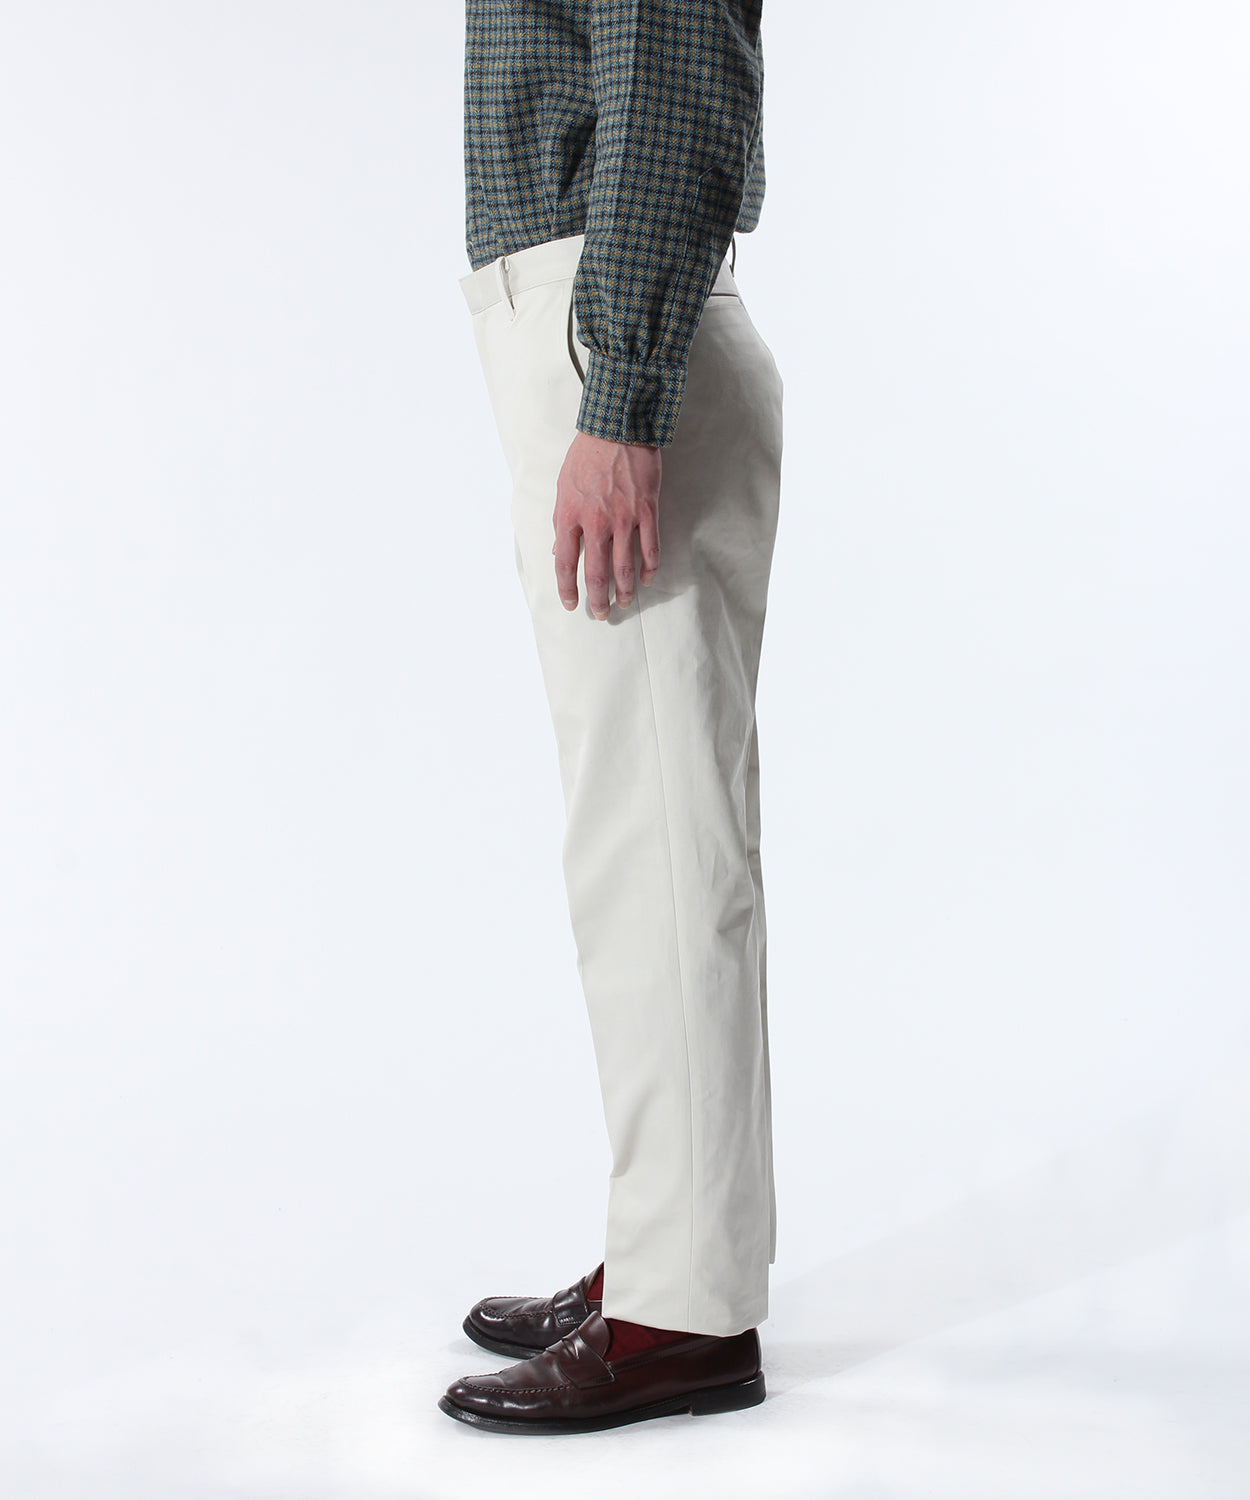 【 23FW 】ANATOMICA TRIM FIT PANT Ⅰ WEST POINT / STONE